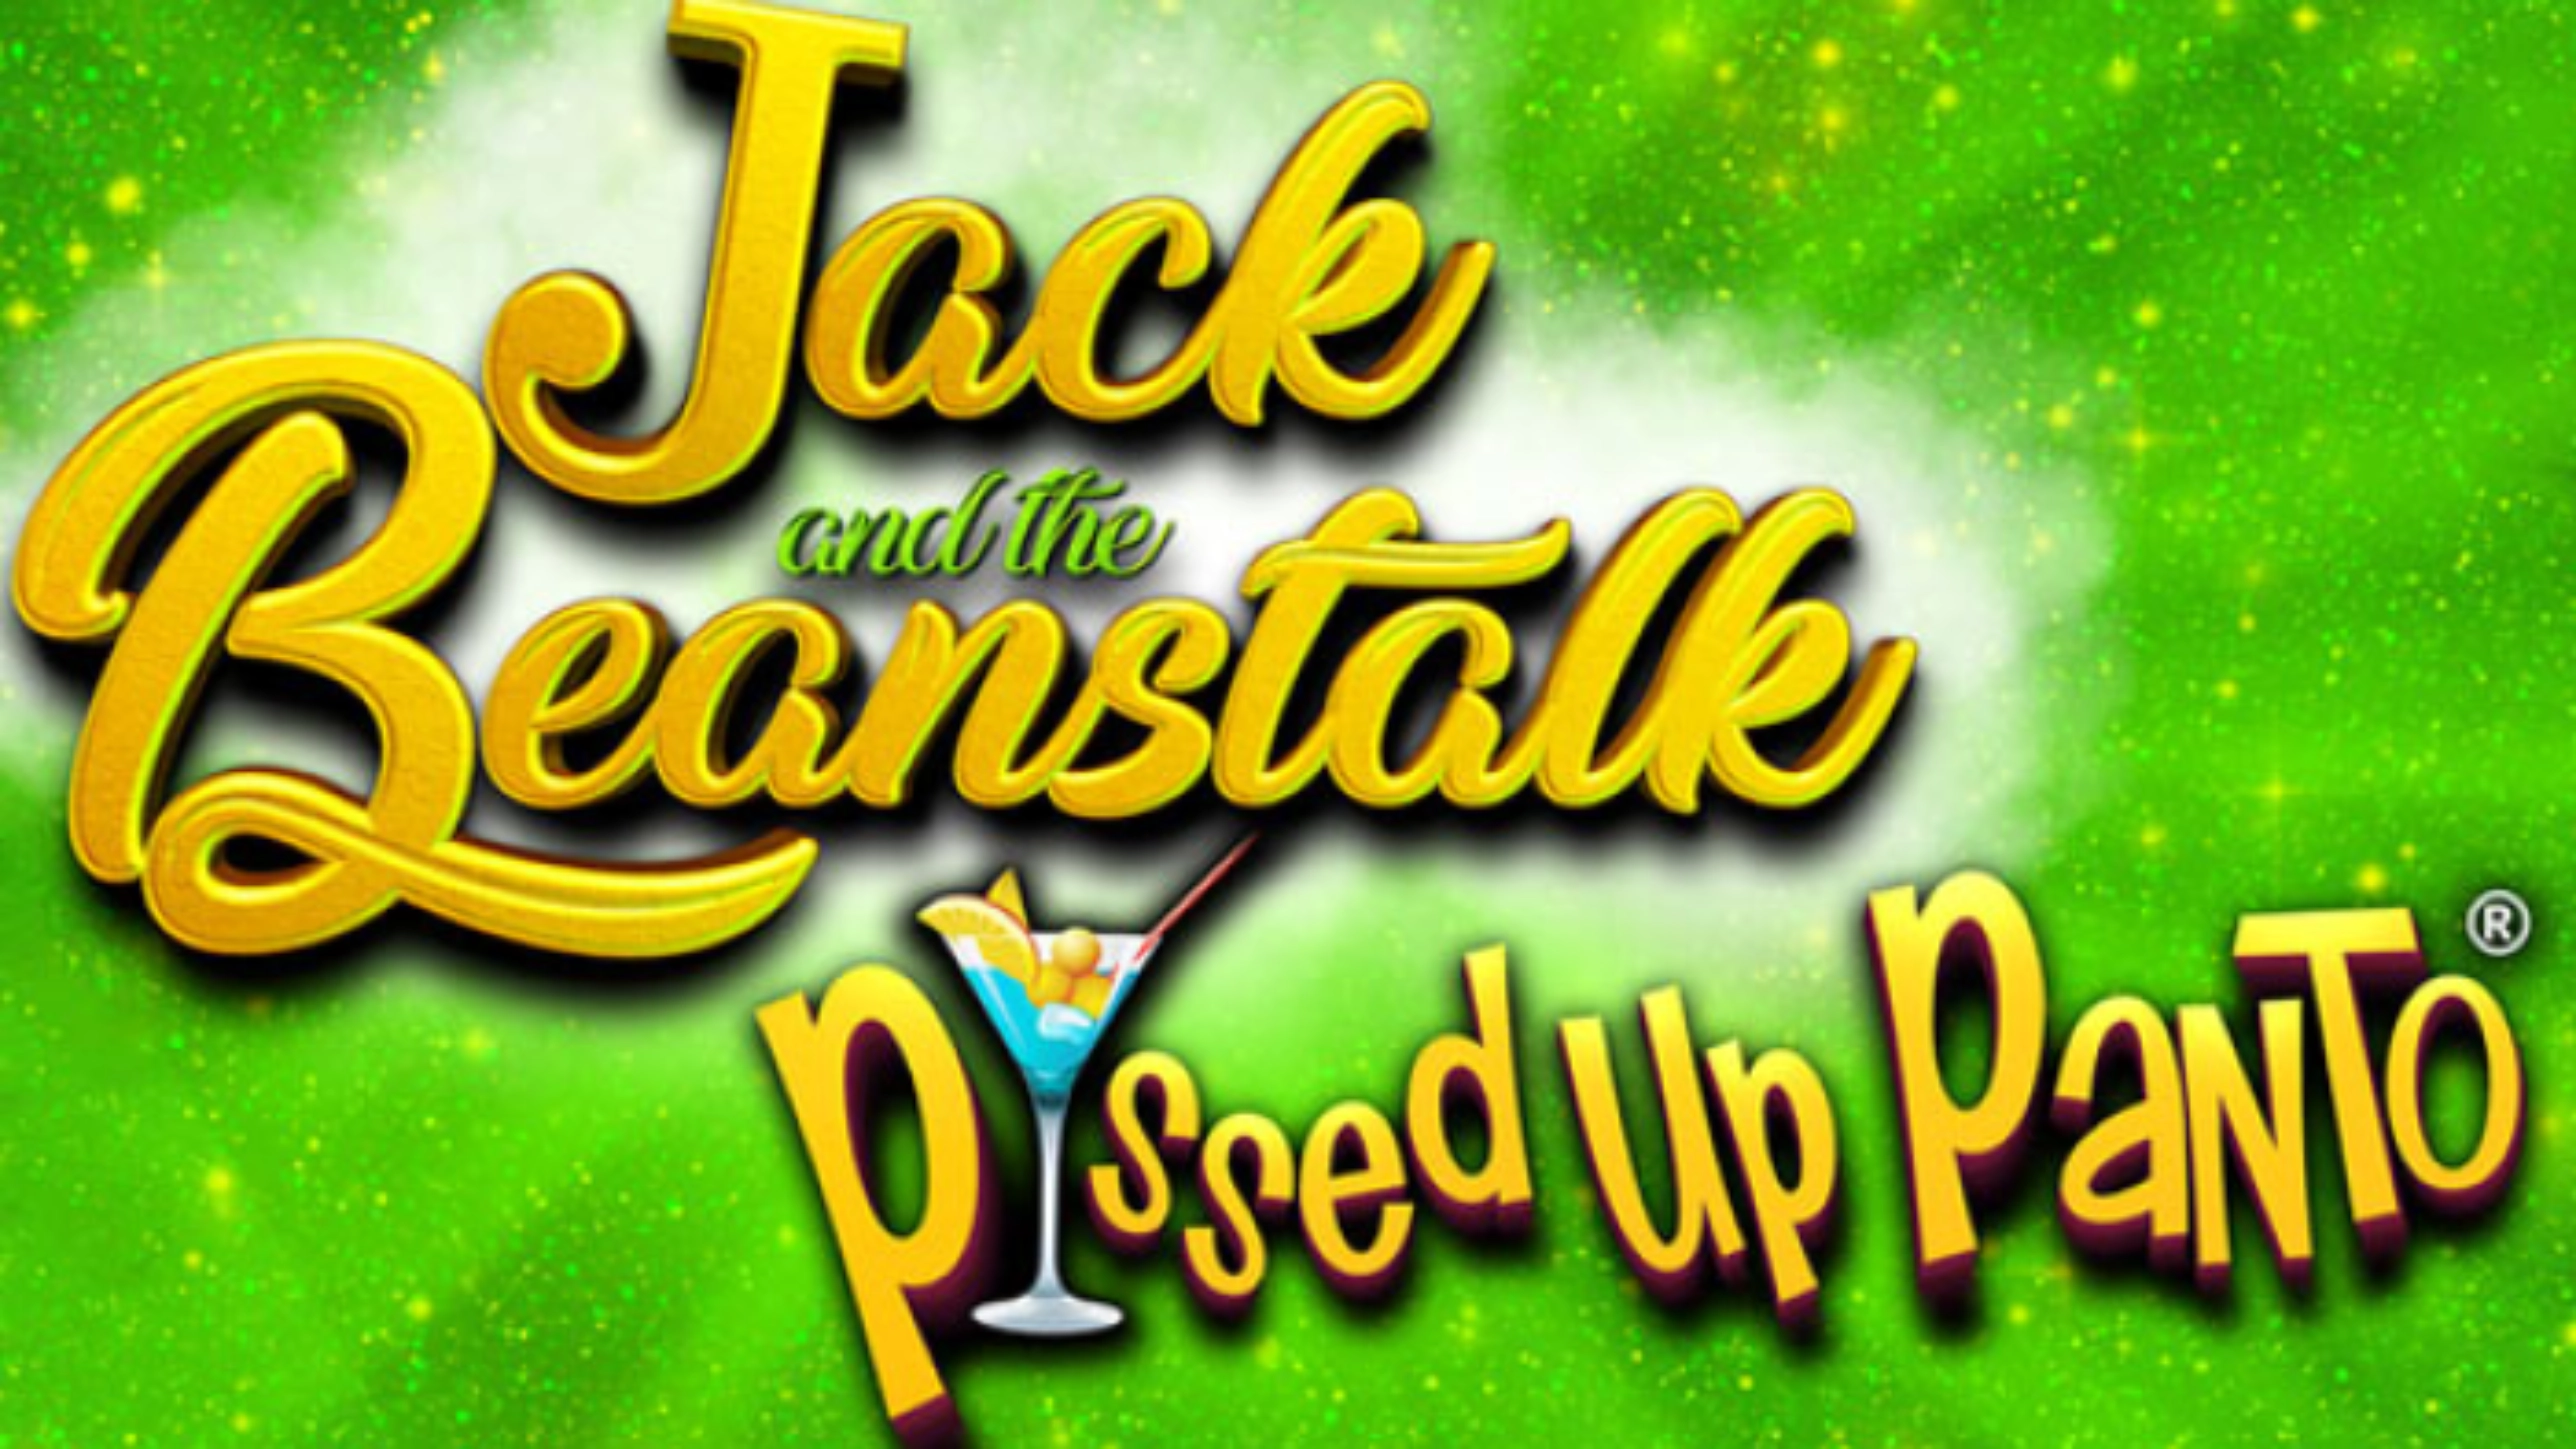 Jack & The Beanstalk - P*ssed UP Panto